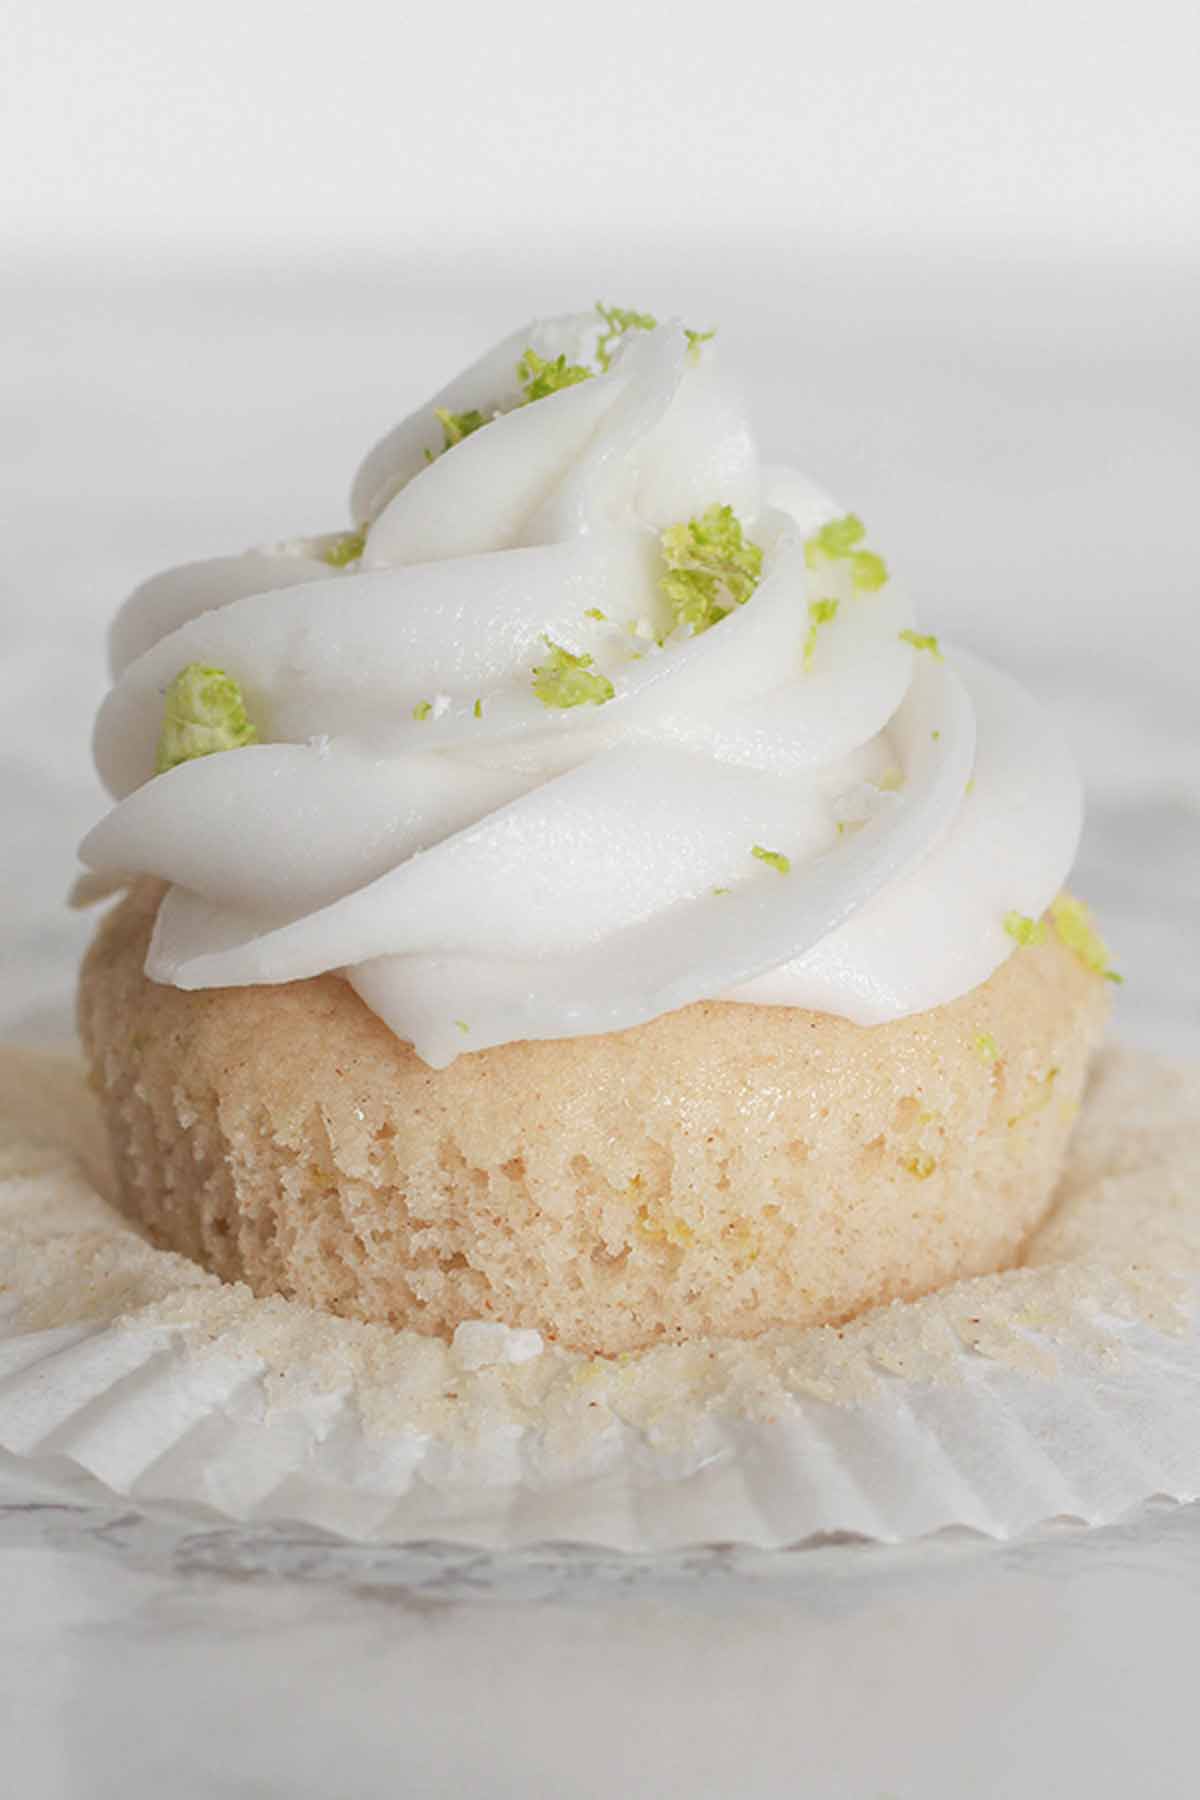 A Single Cupcake Topped With Coconut Frosting And Lime Zest